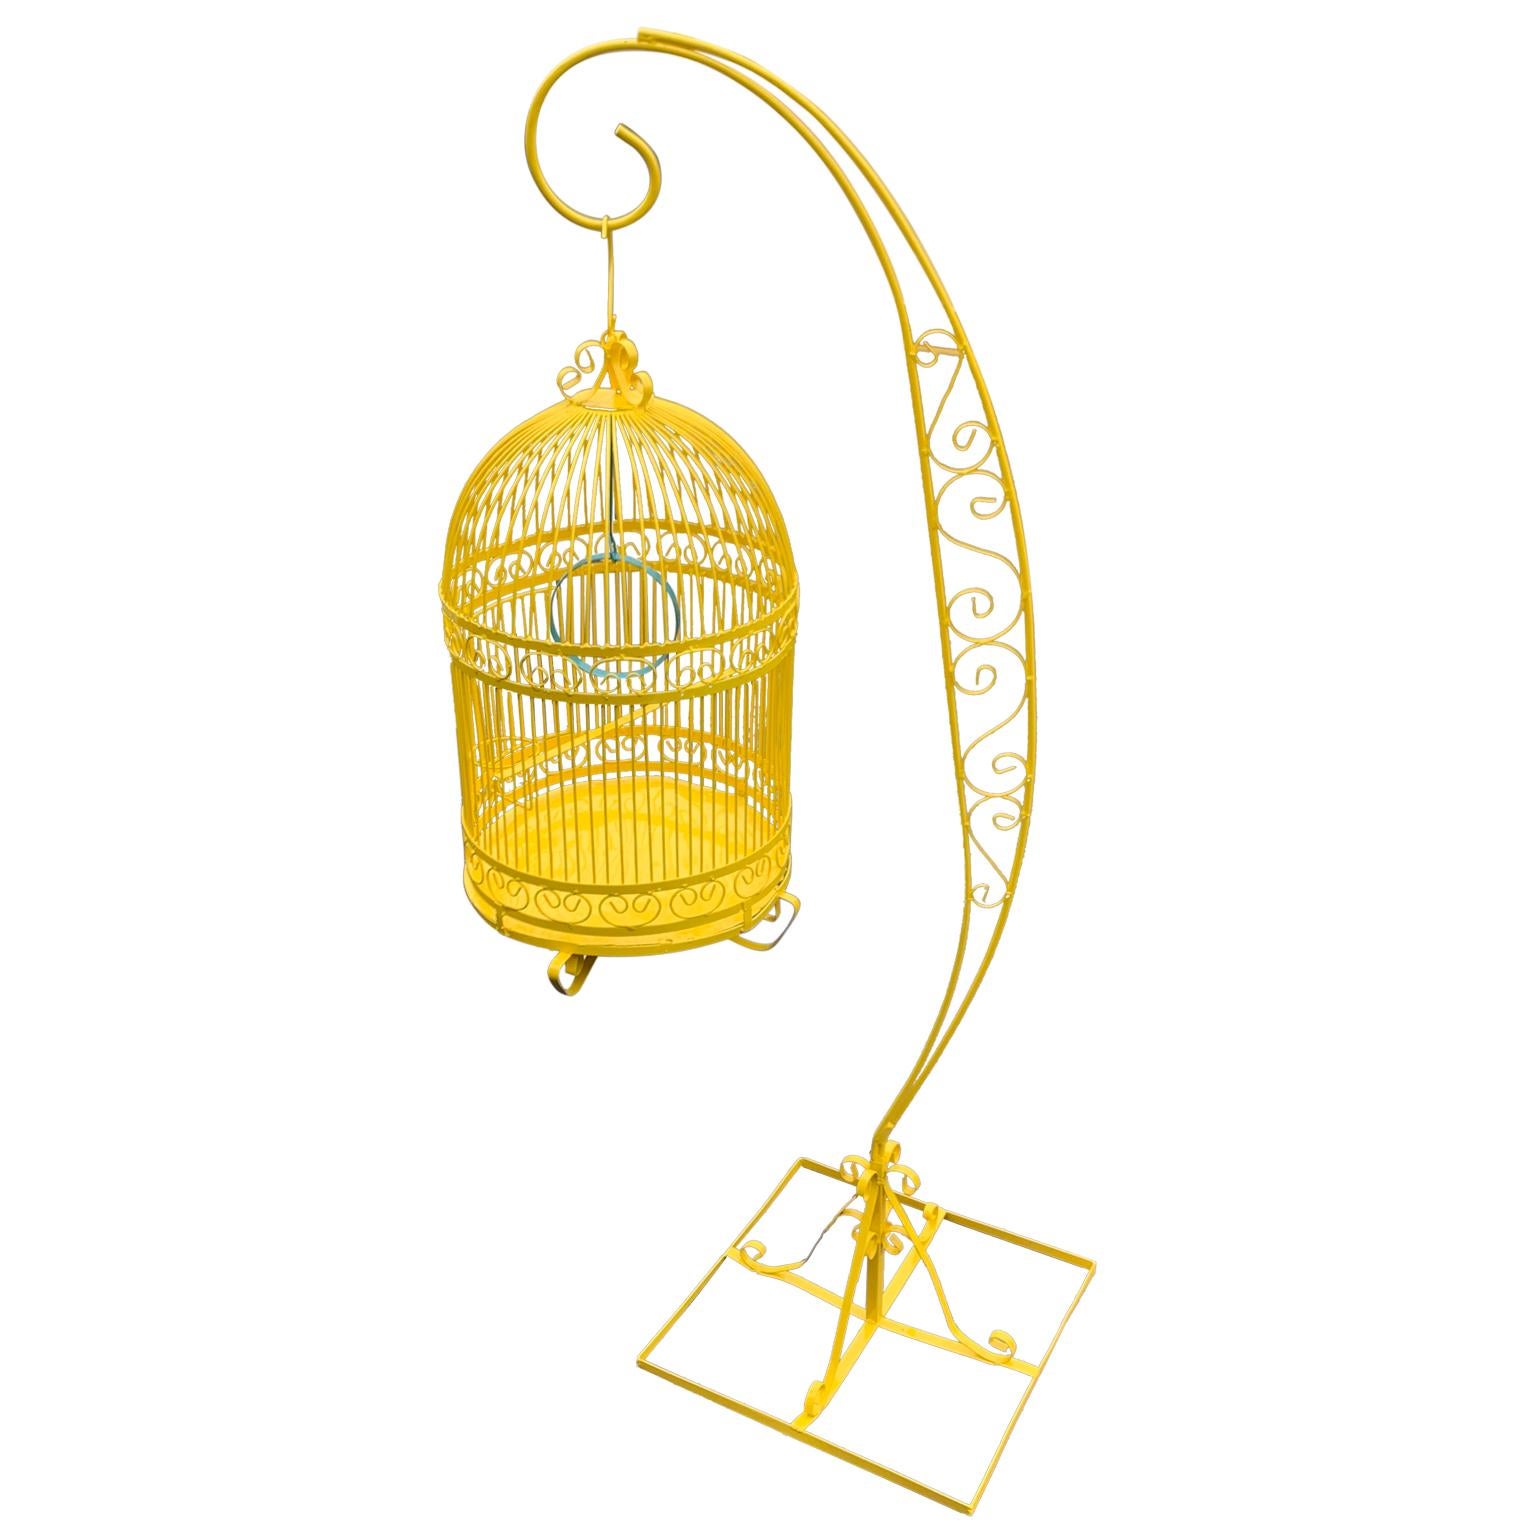 yellow bird in cage